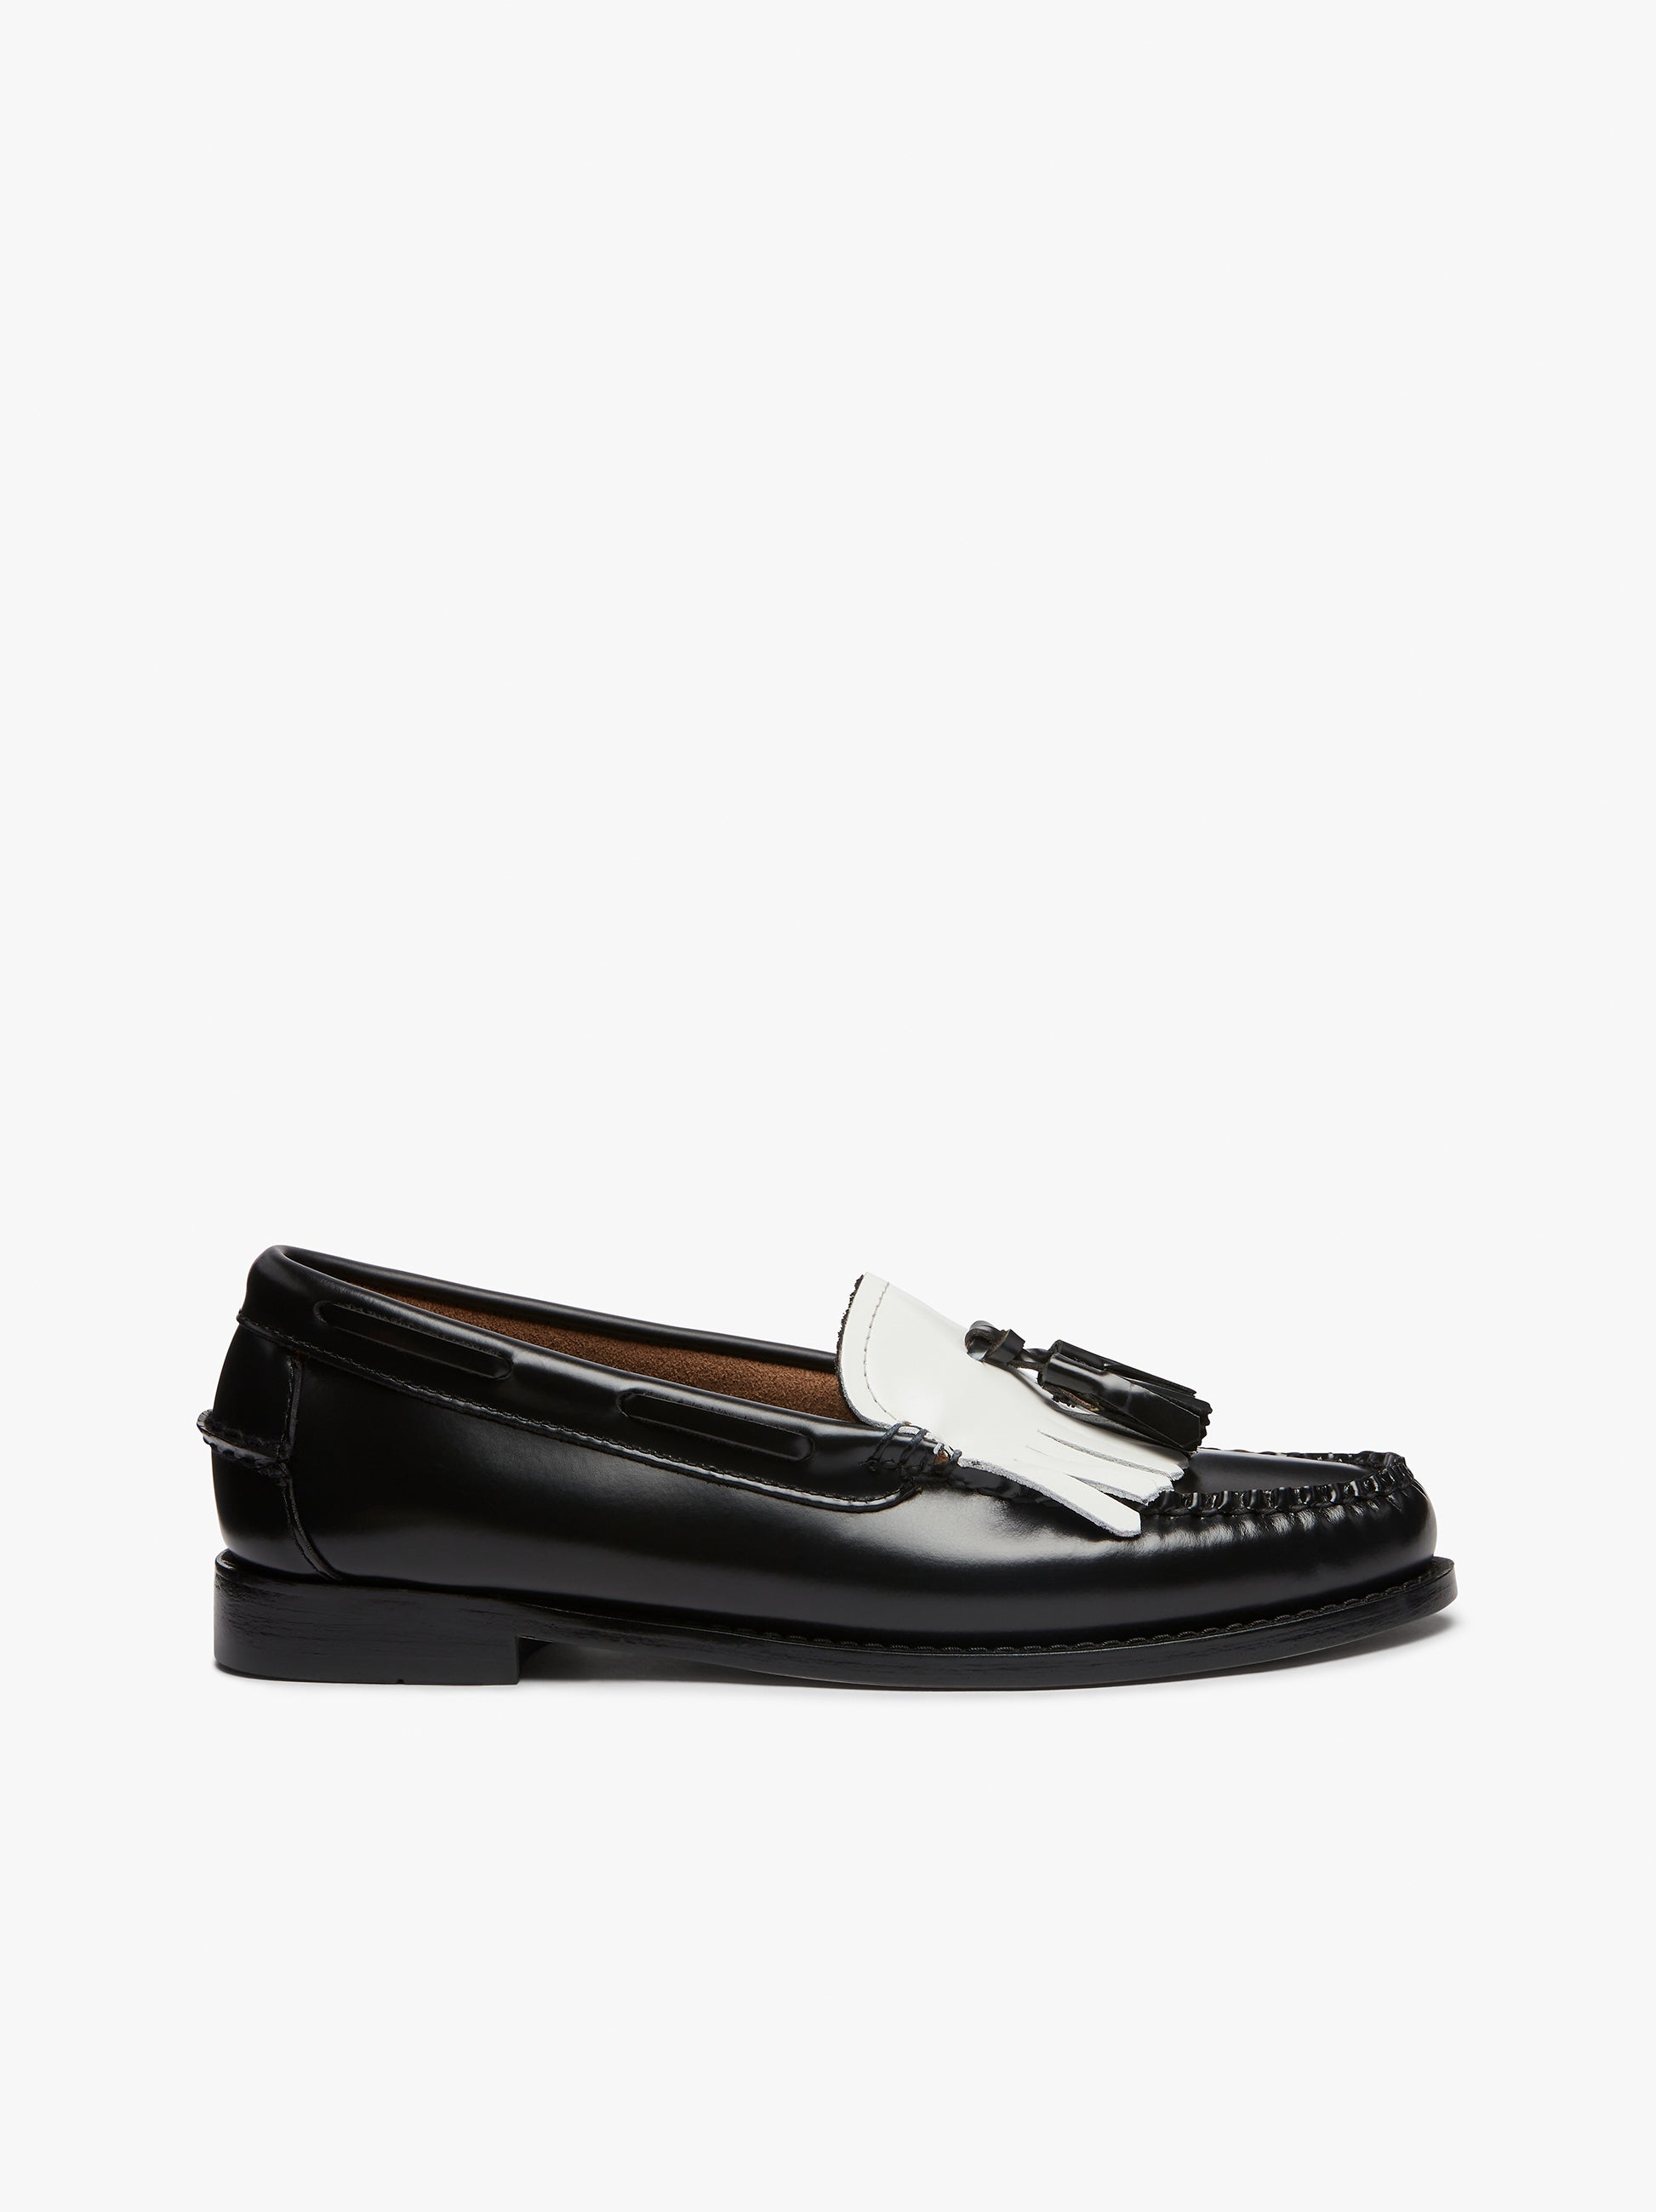 Black And White Tassel Loafers | Womens Loafers – G.H.BASS